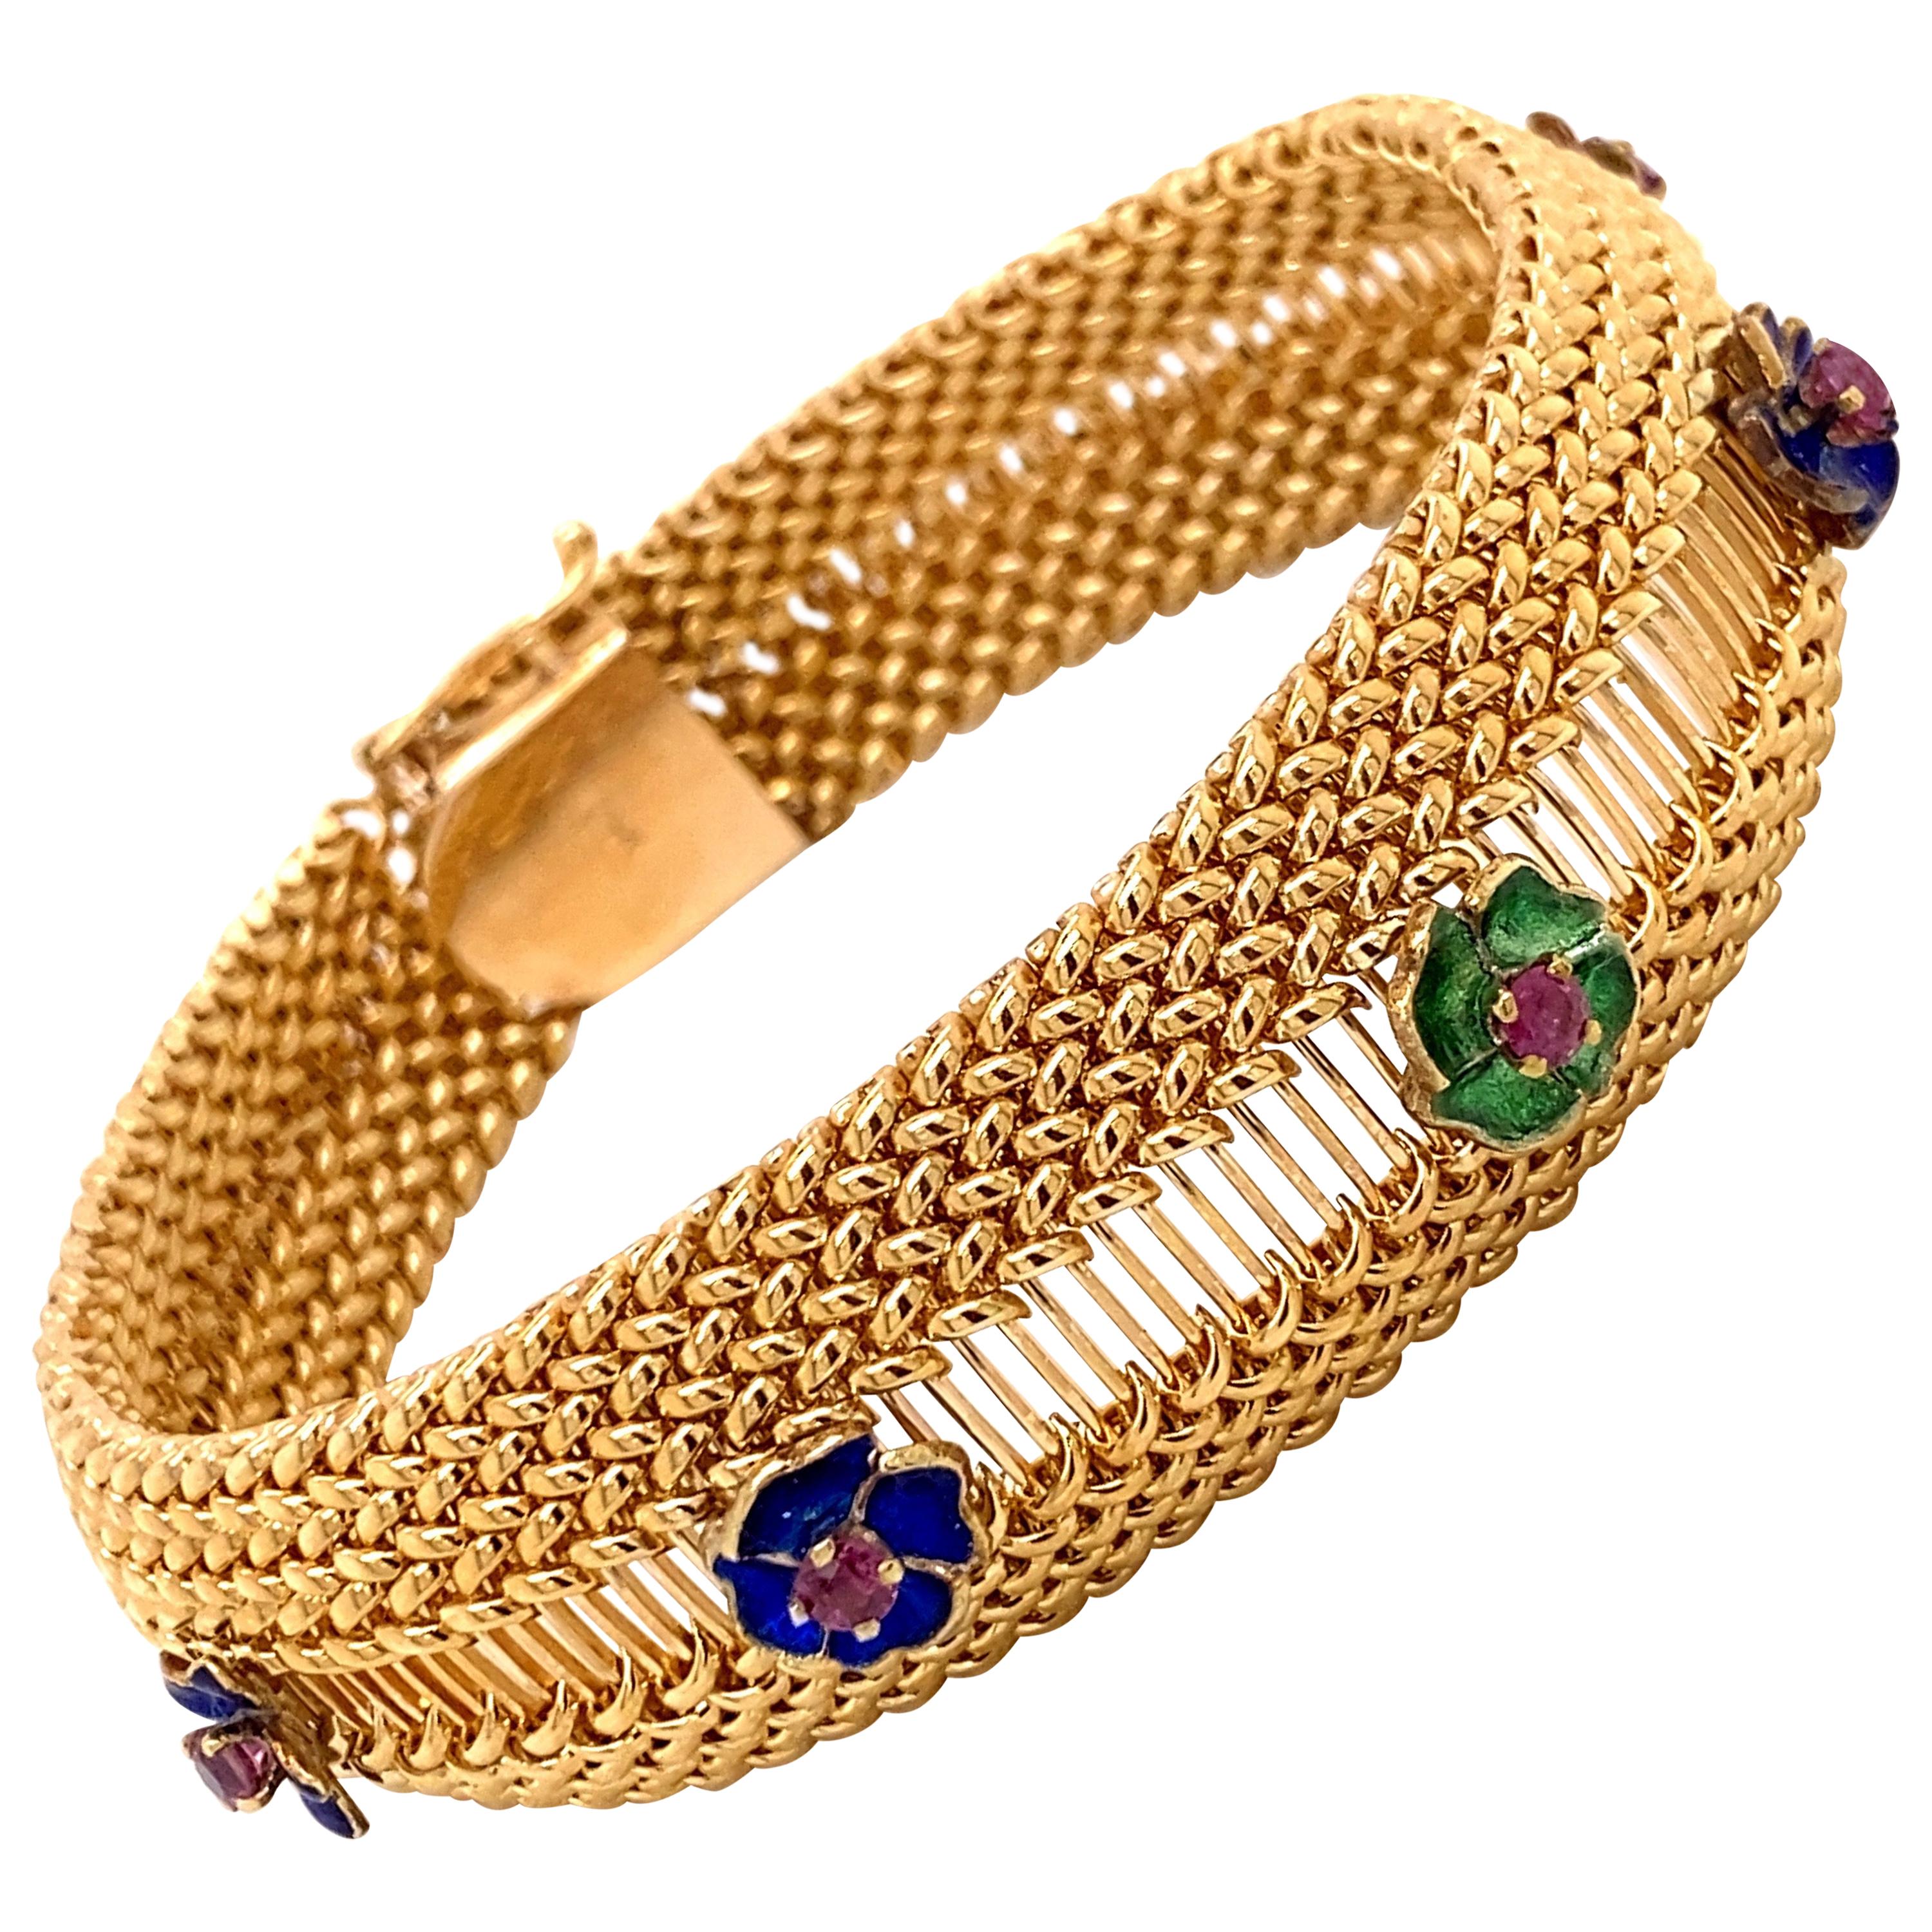 Vintage 1960s 14 Karat Yellow Gold Mesh Bracelet with Enamel Flowers and Rubies For Sale